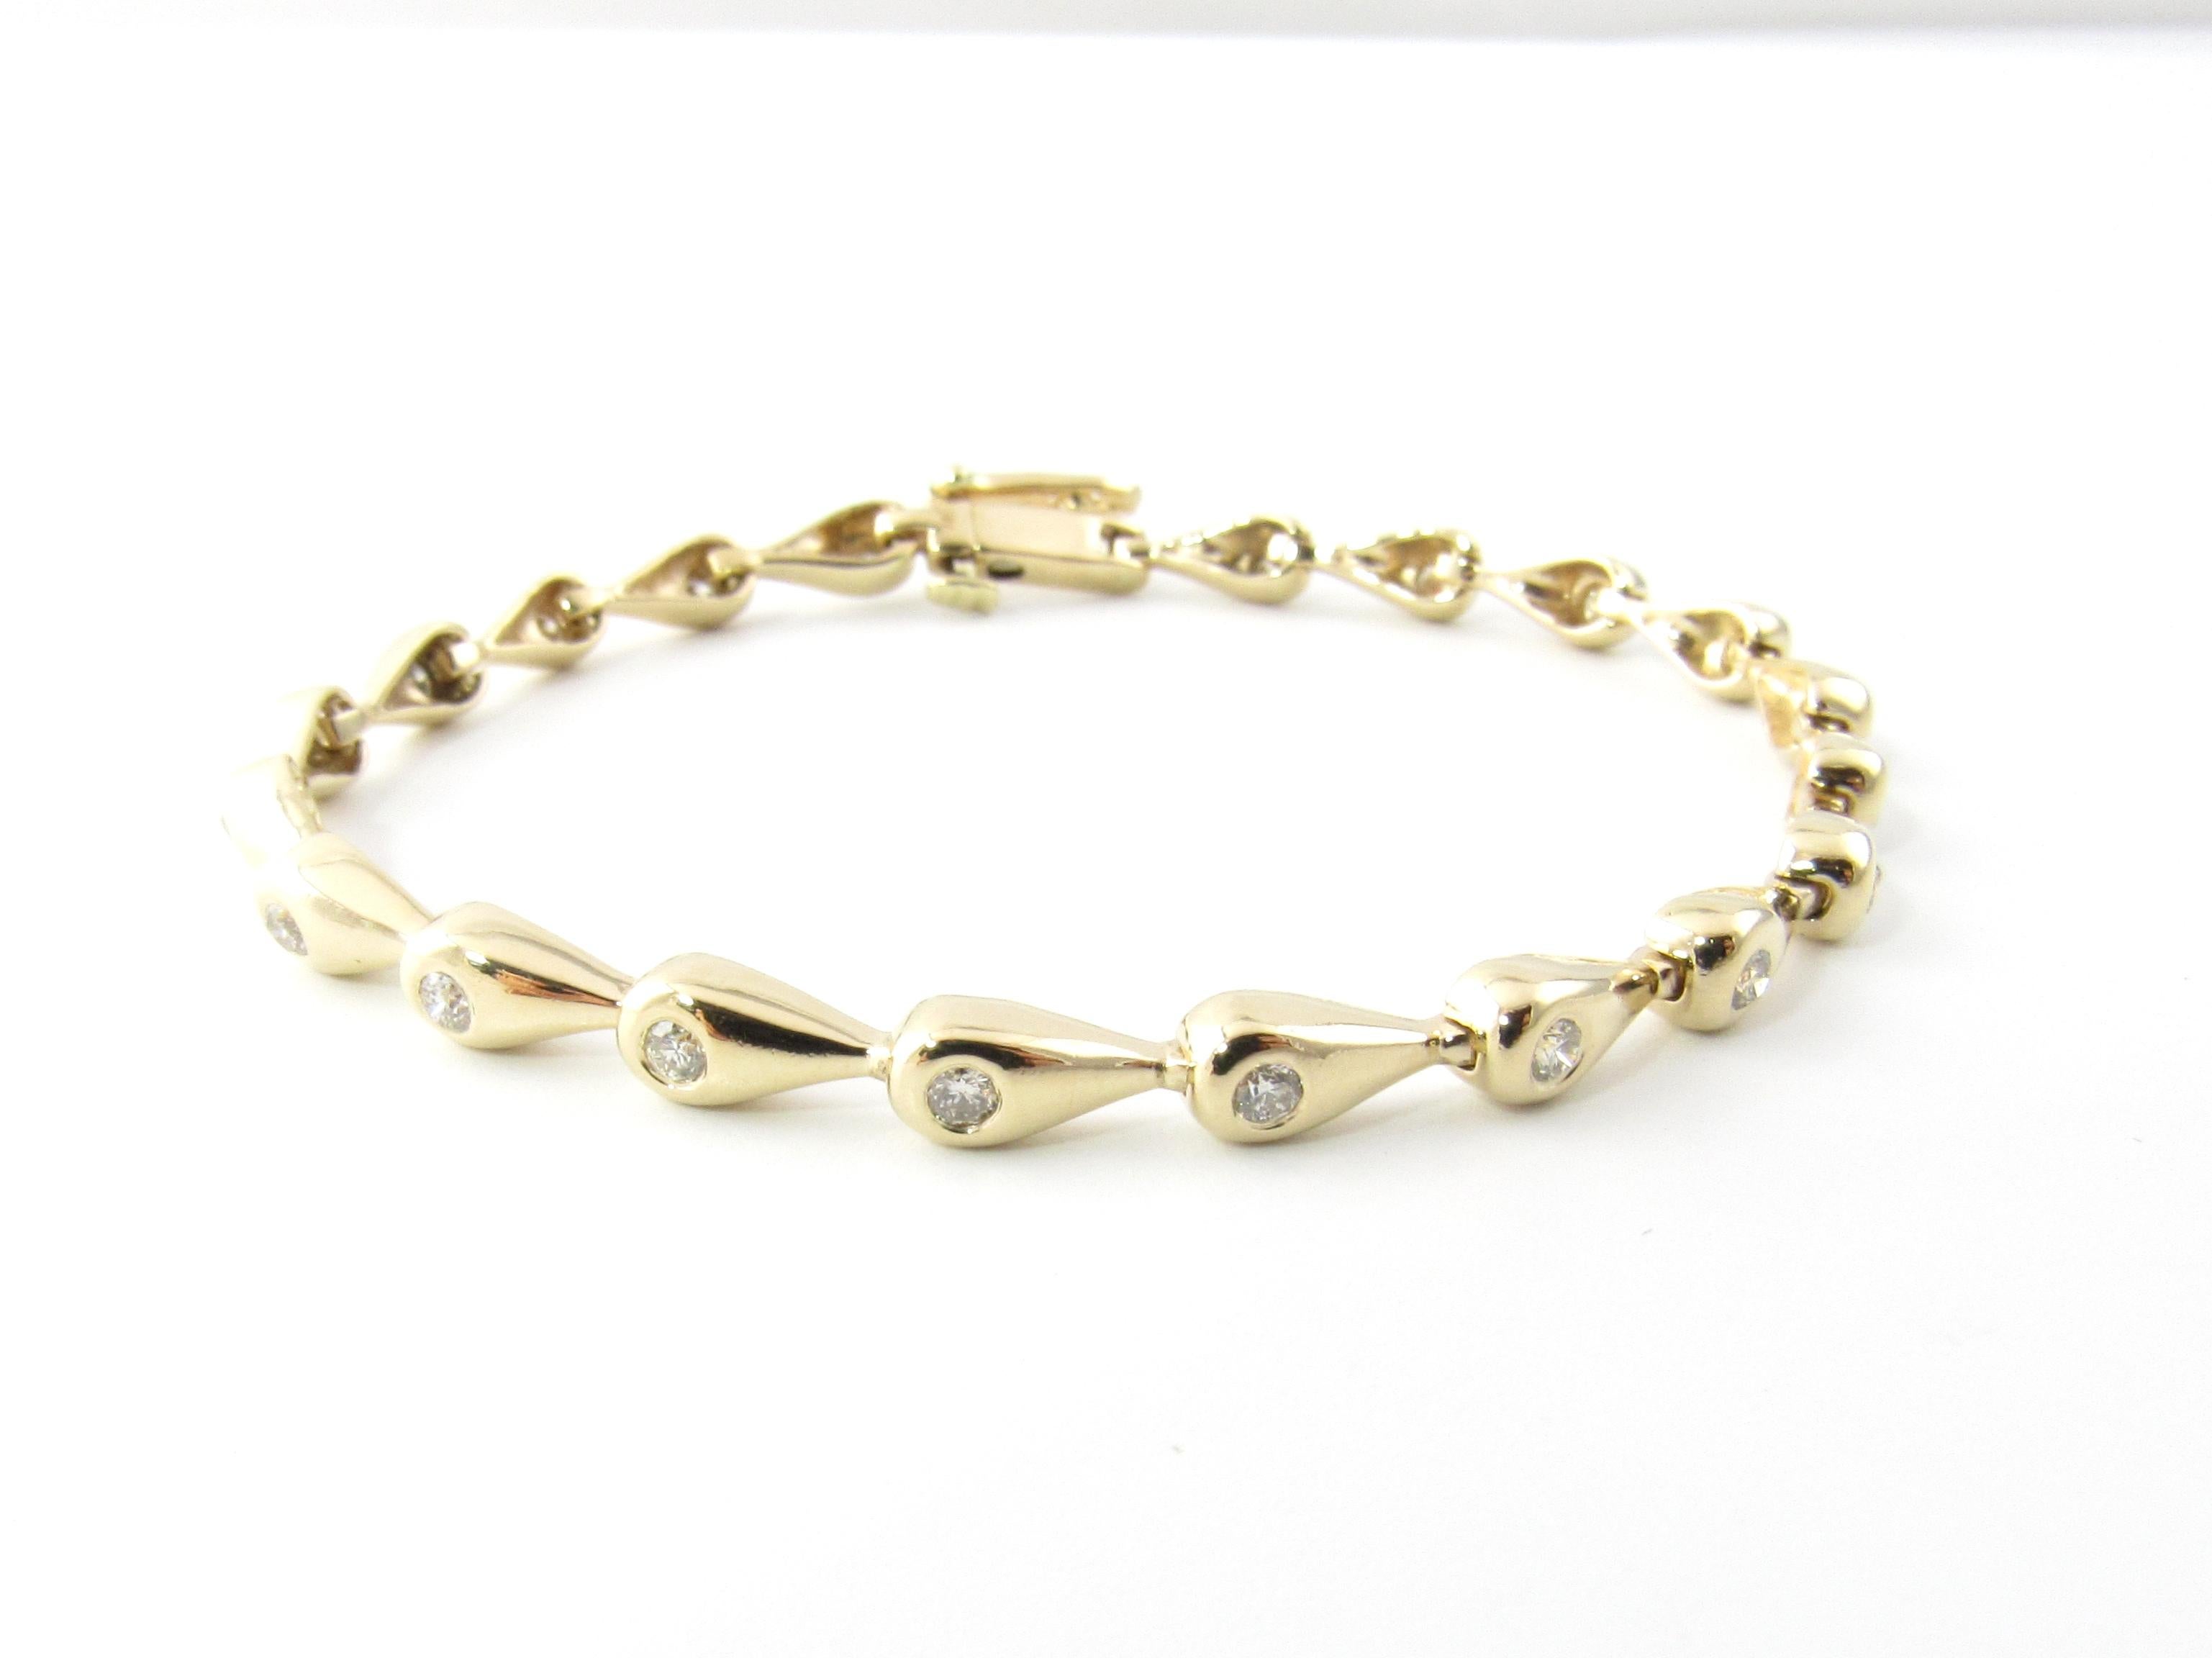 Vintage 14 Karat Yellow Gold and Diamond Bracelet

This sparkling bracelet features 20 round brilliant cut diamonds set in beautifully detailed 14K yellow gold. Width: 4 mm. Safety closure.

Approximate total diamond weight: .80 ct.

Diamond color: